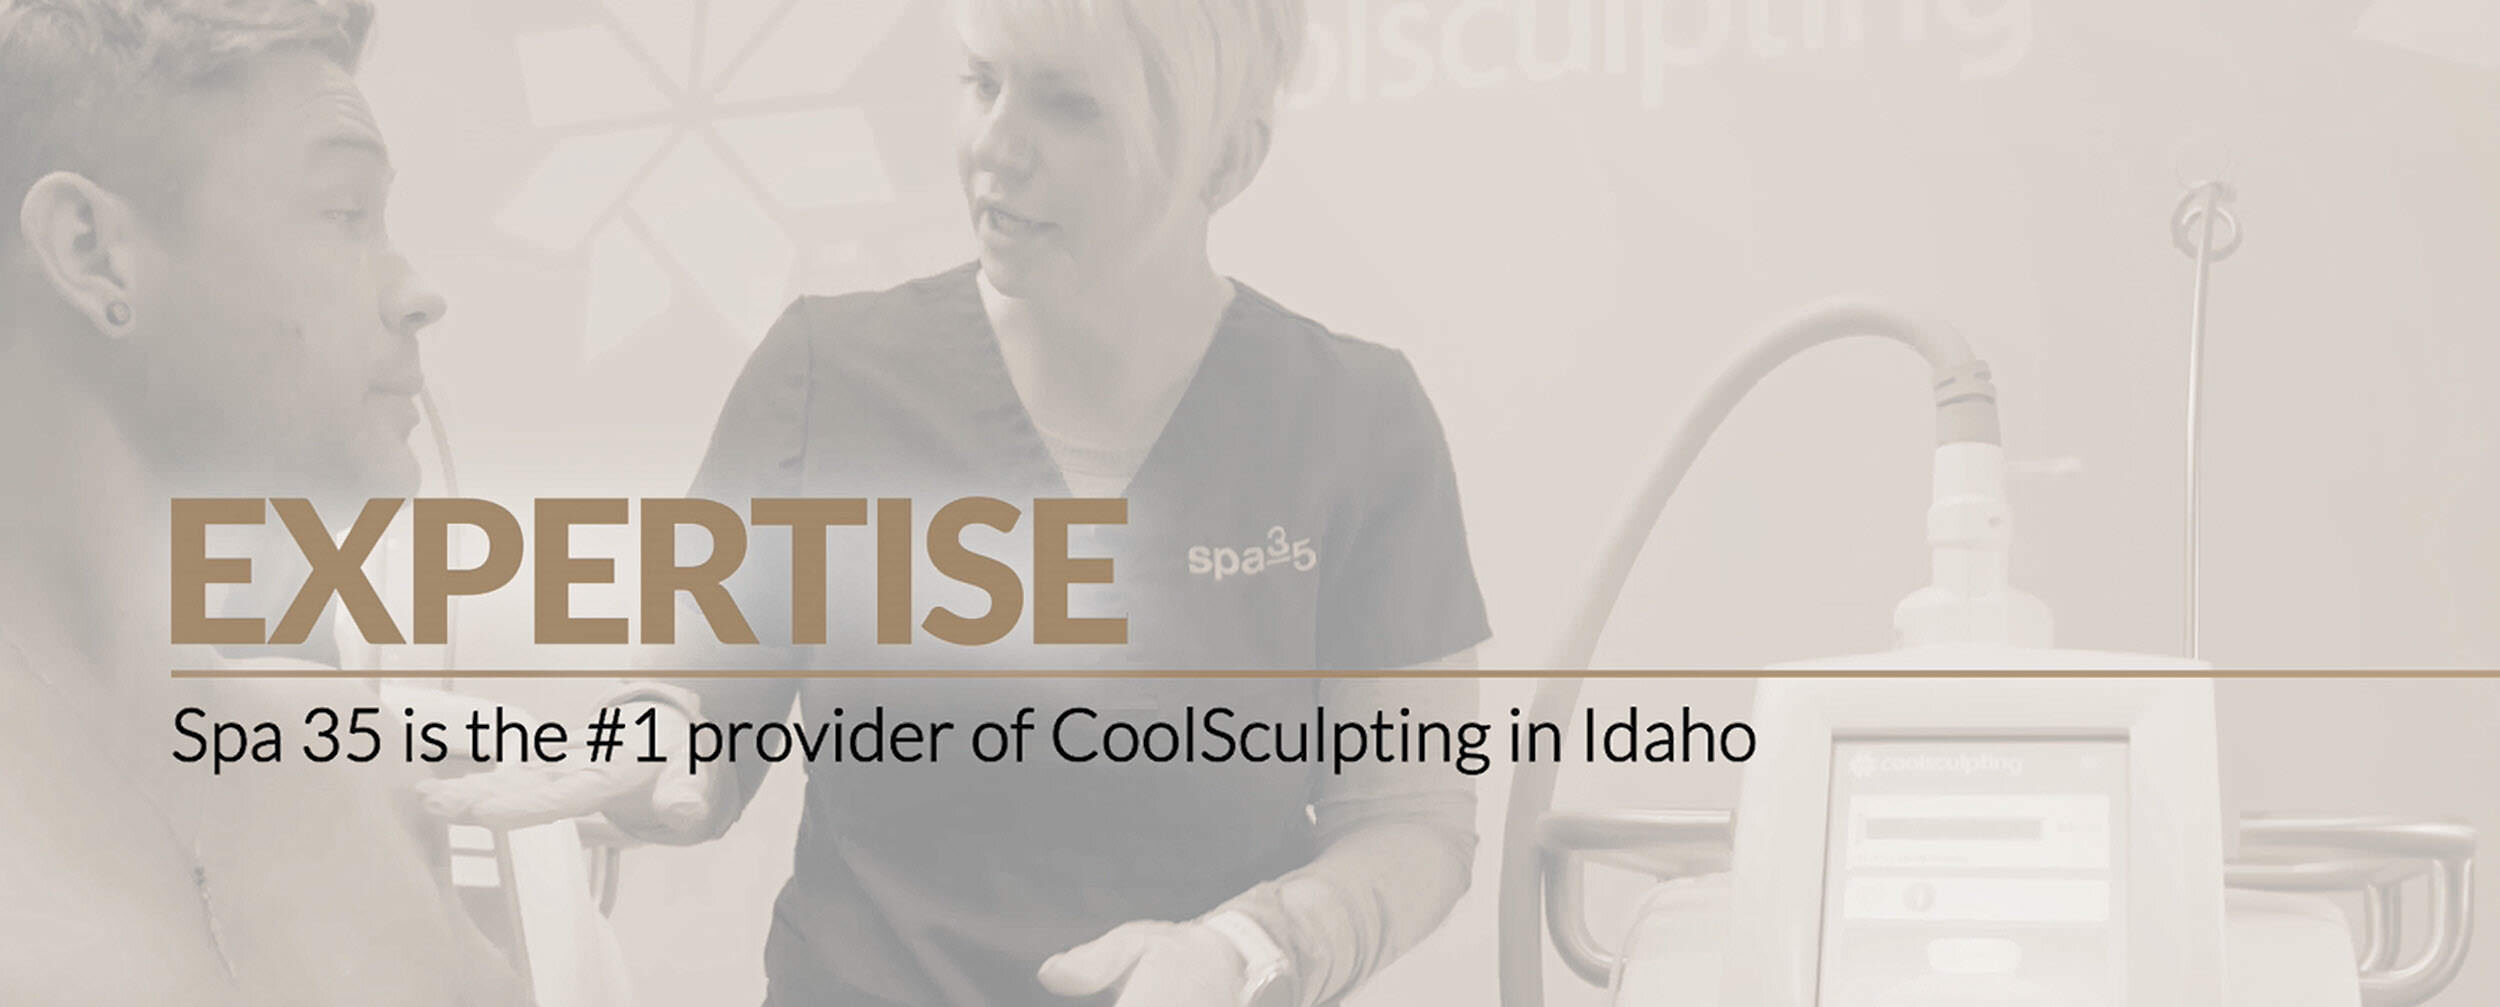 Master Certified in CoolSculpting, Consultants to Candela Medical - Worldwide leaders in cosmetic lasers (Copy) (Copy) (Copy) (Copy) (Copy) (Copy) (Copy) (Copy)